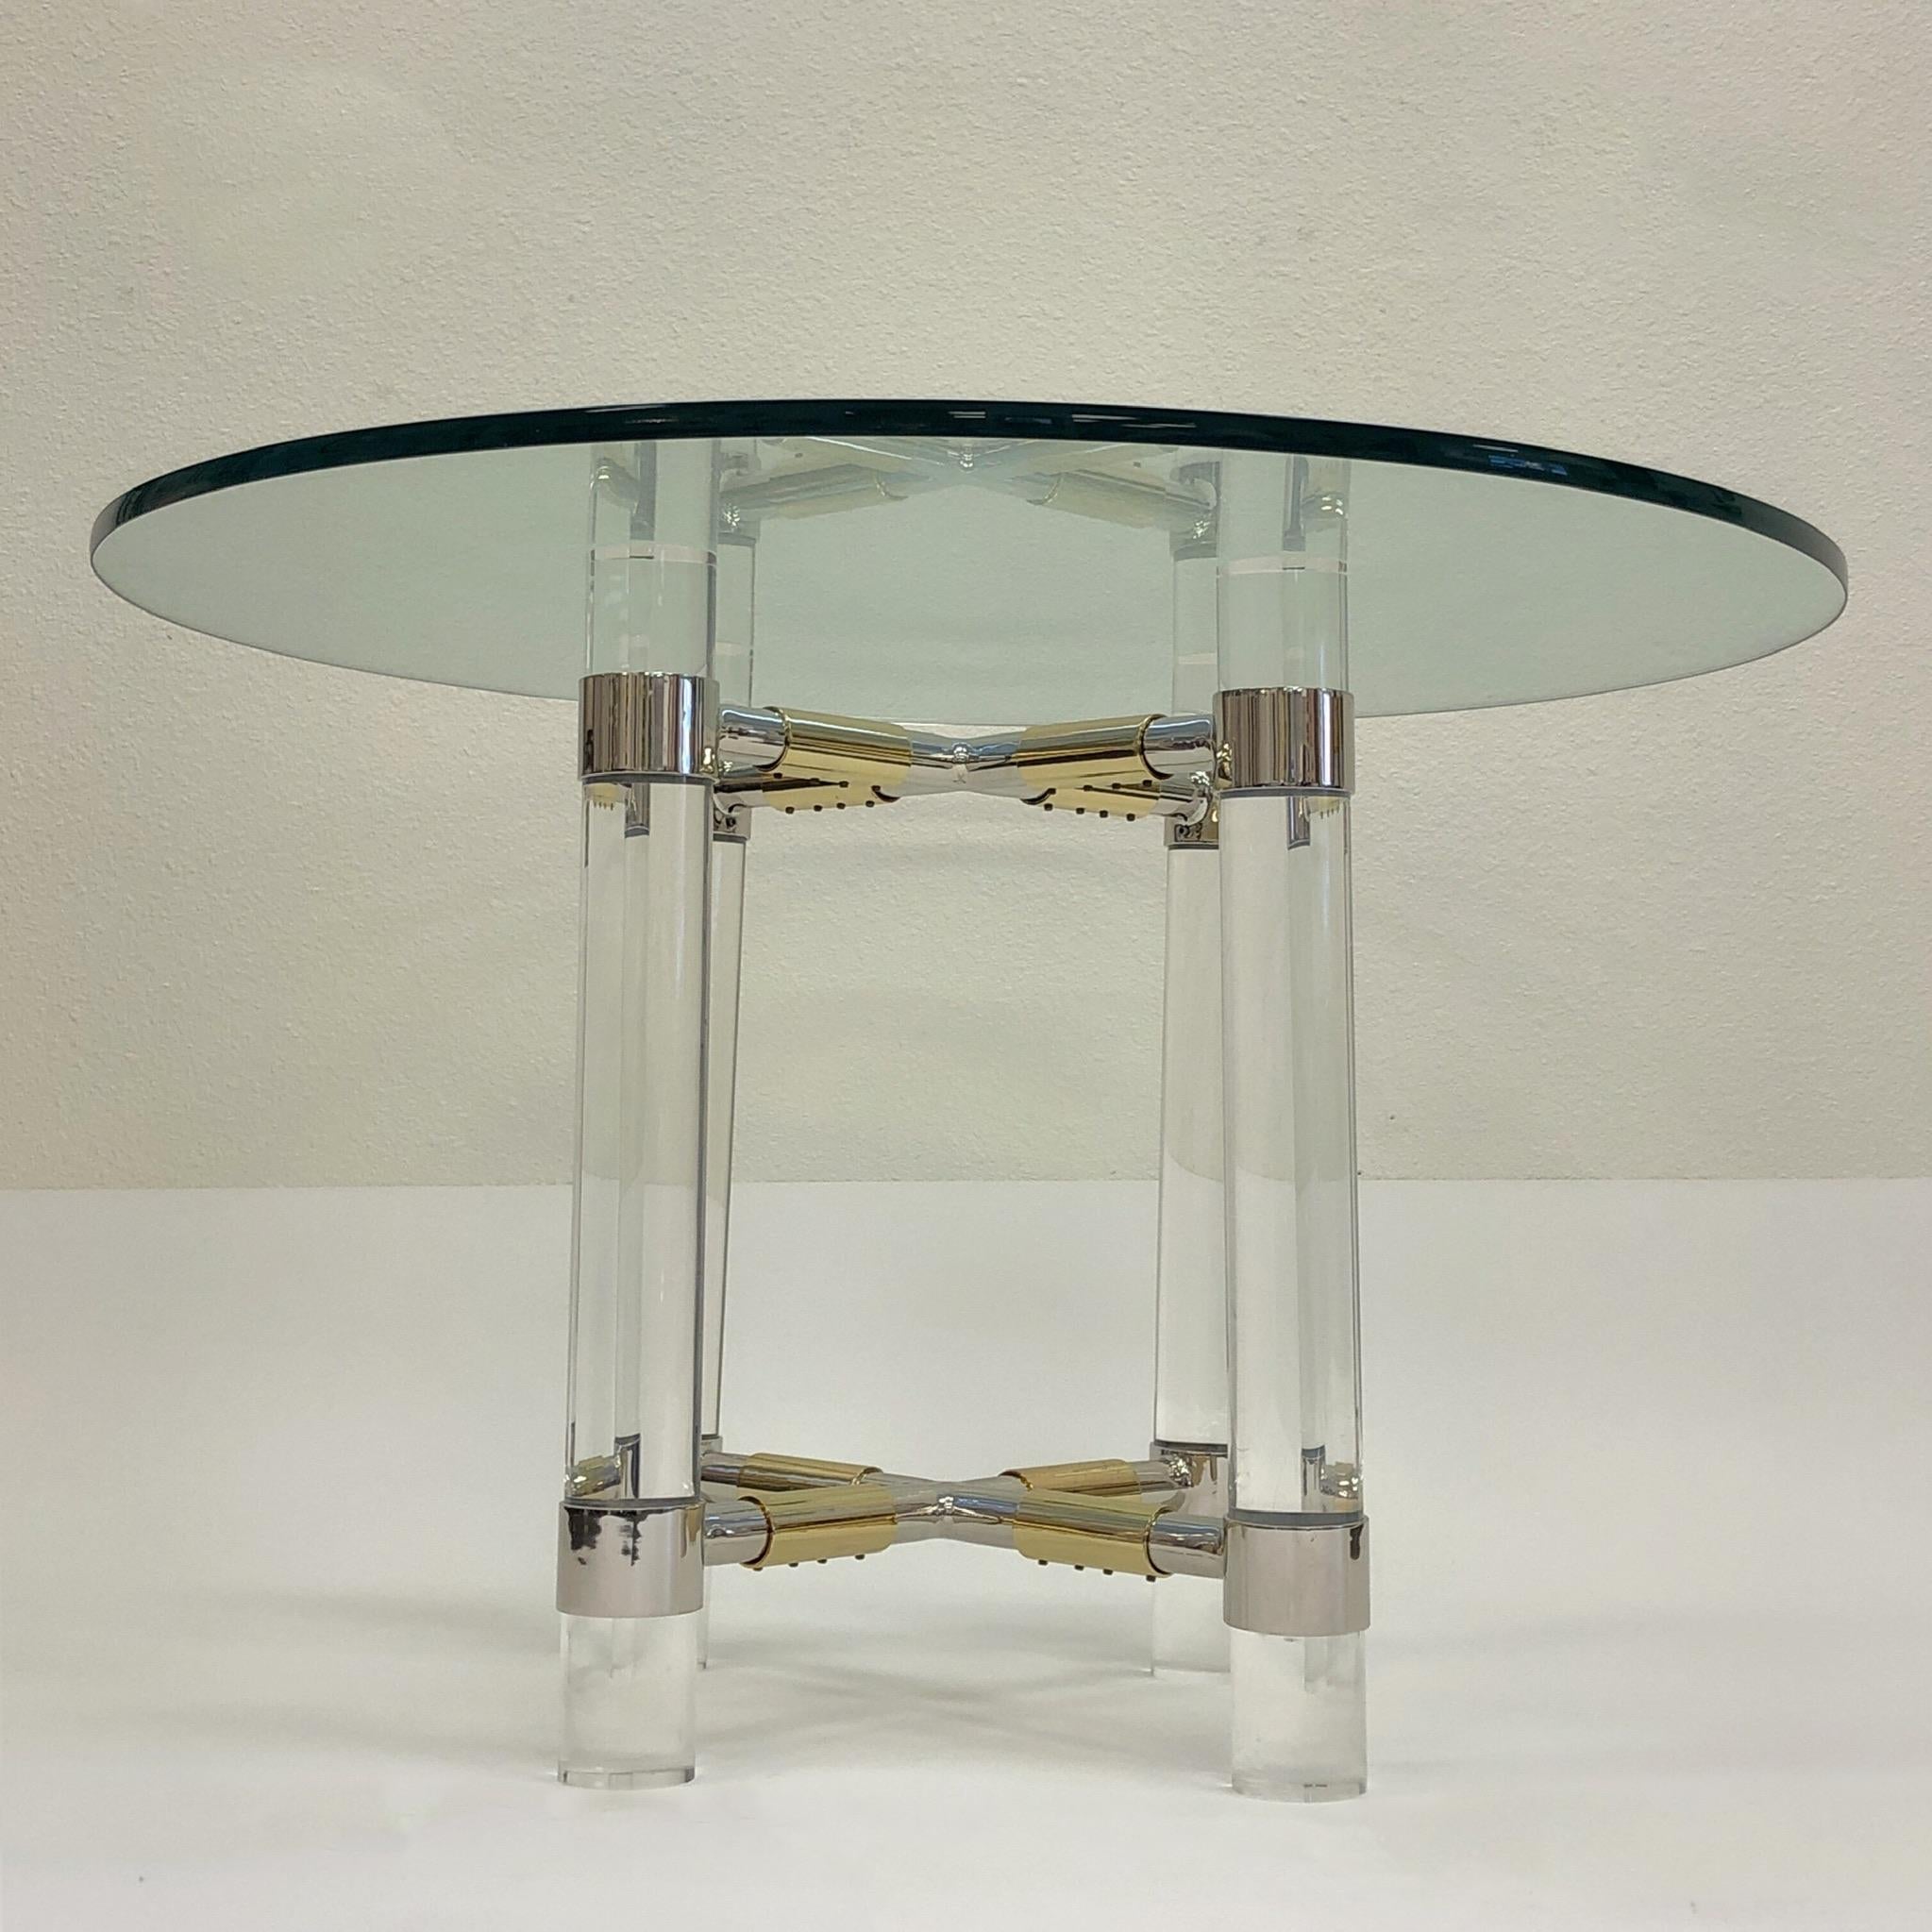 A rare polish chrome, brass and clear Lucite game table from “Post Line” by renowned American designer Charles Hollis Jones. All the metal has been newly re-plated and the Lucite has been newly professionally polished. The Lucite does have some